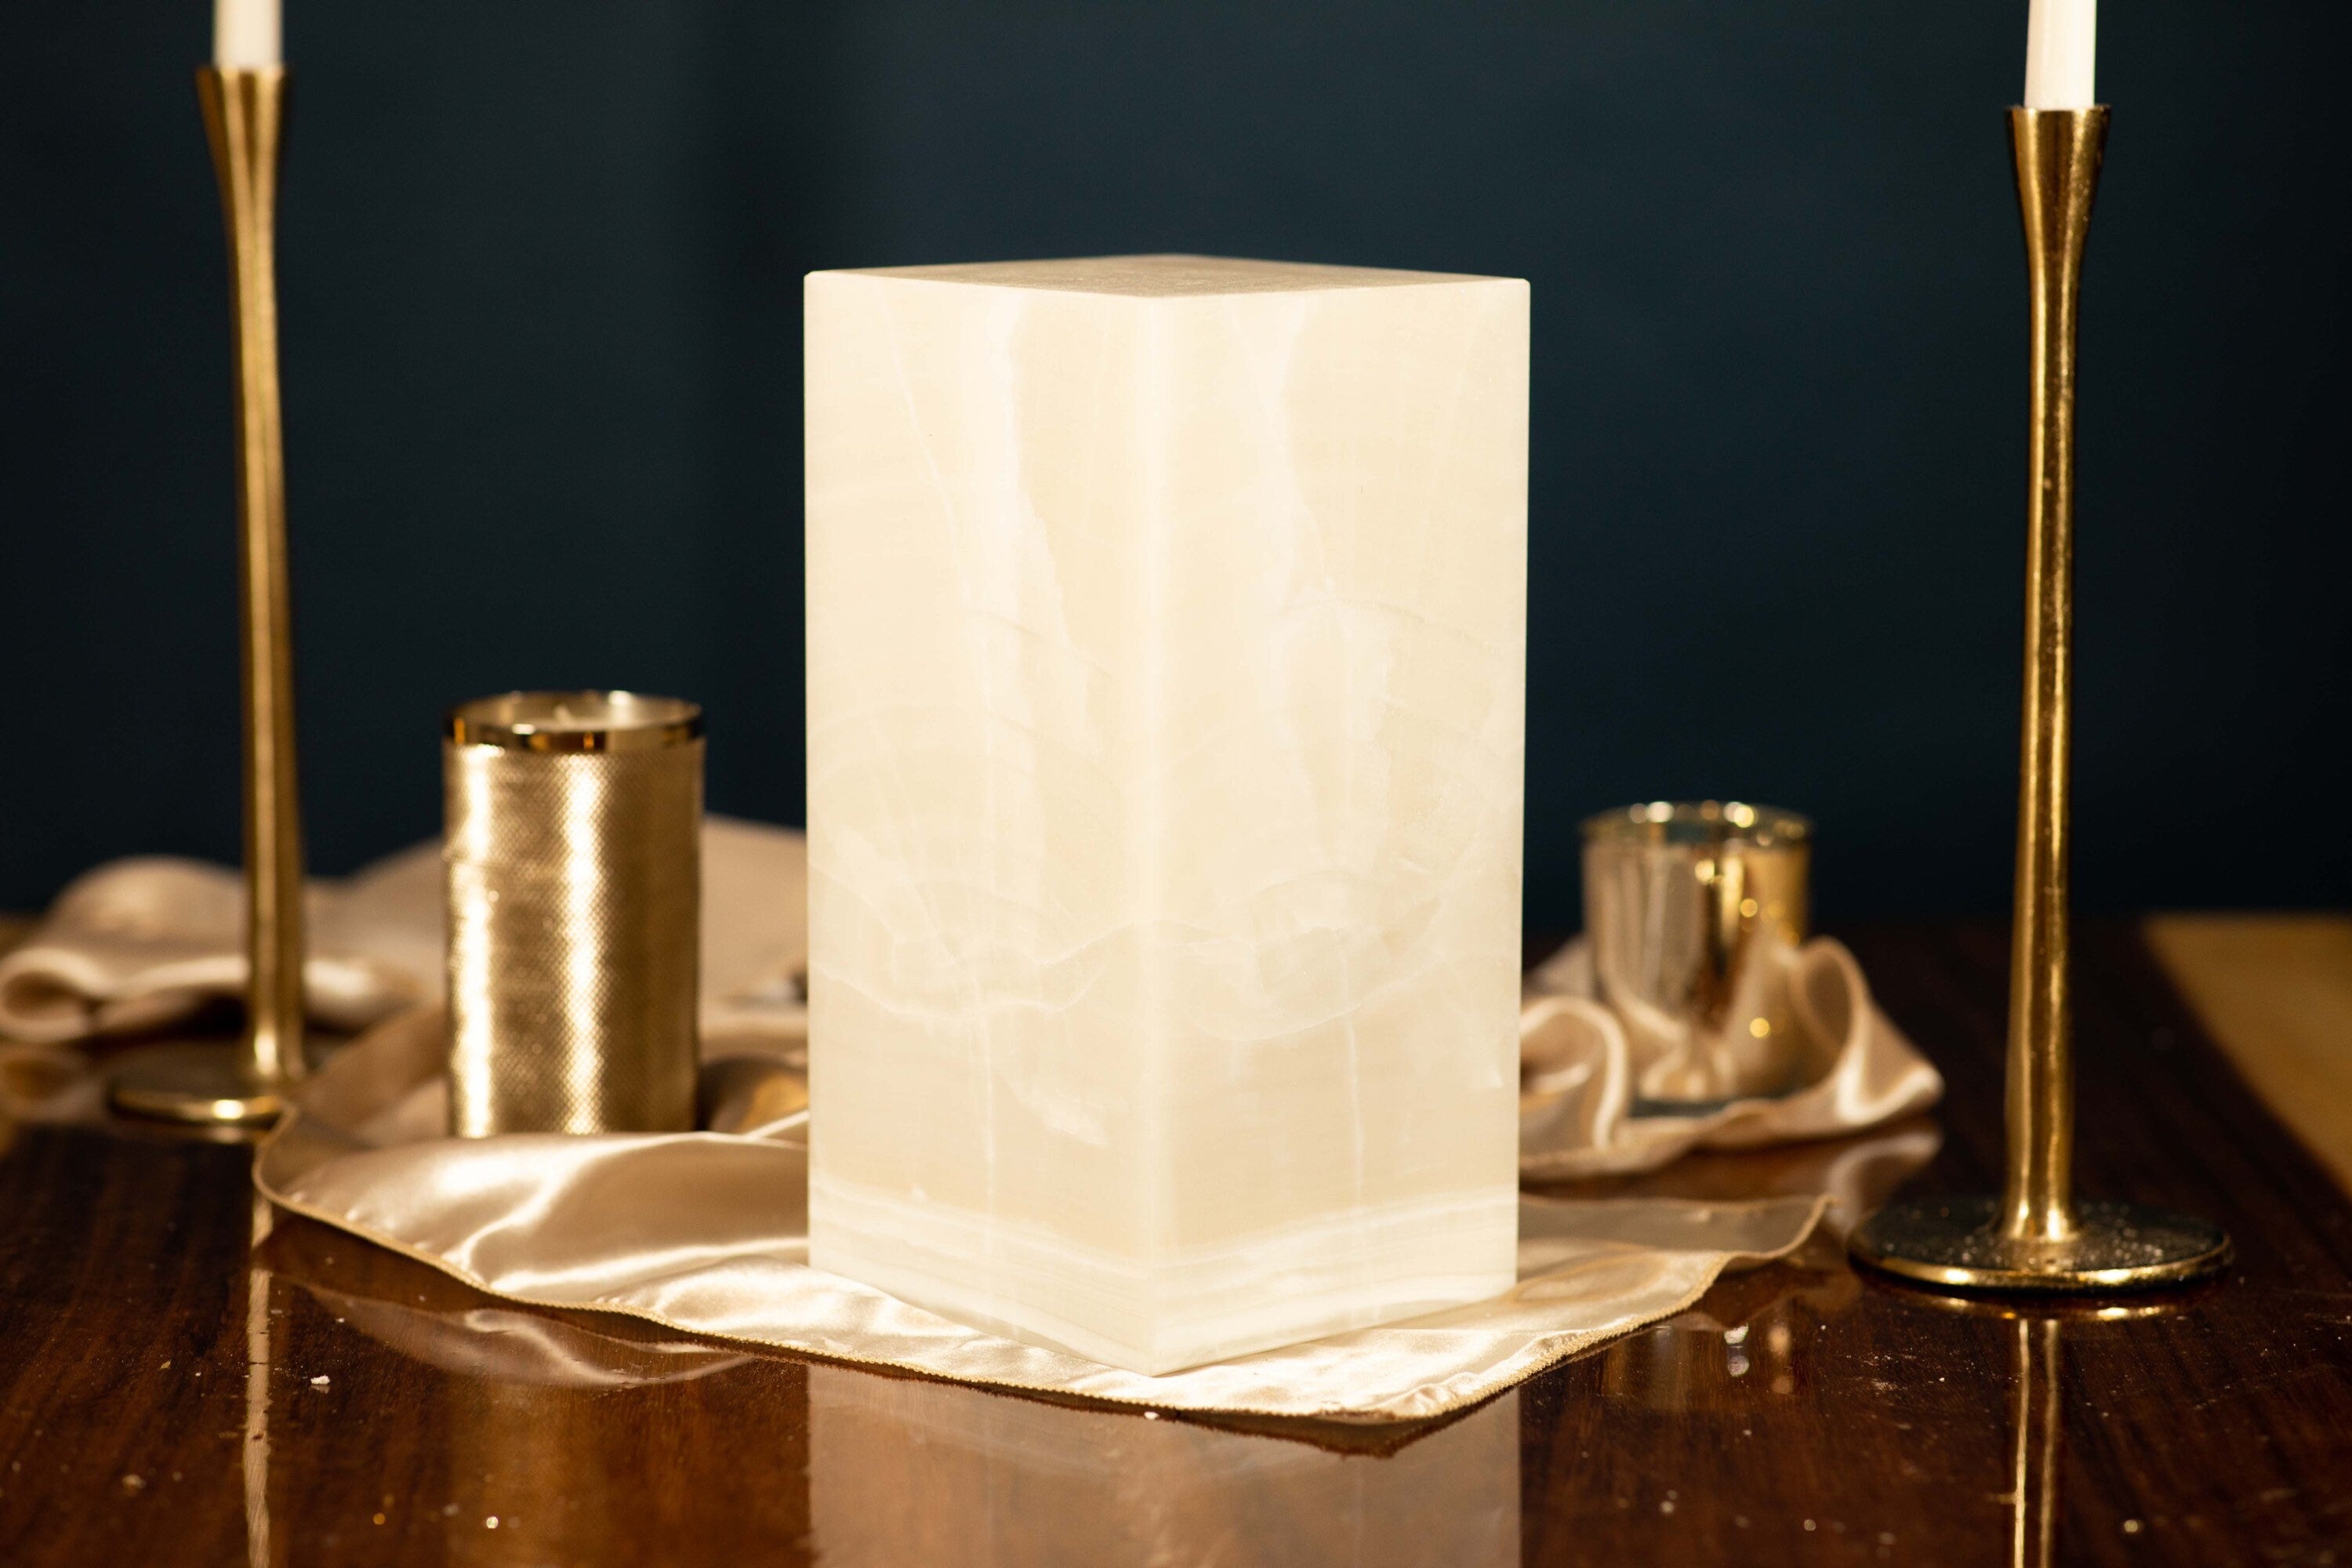 Serenity Stone Lamp - A tranquil addition to any room with its natural onyx stone material and calming warm glow.